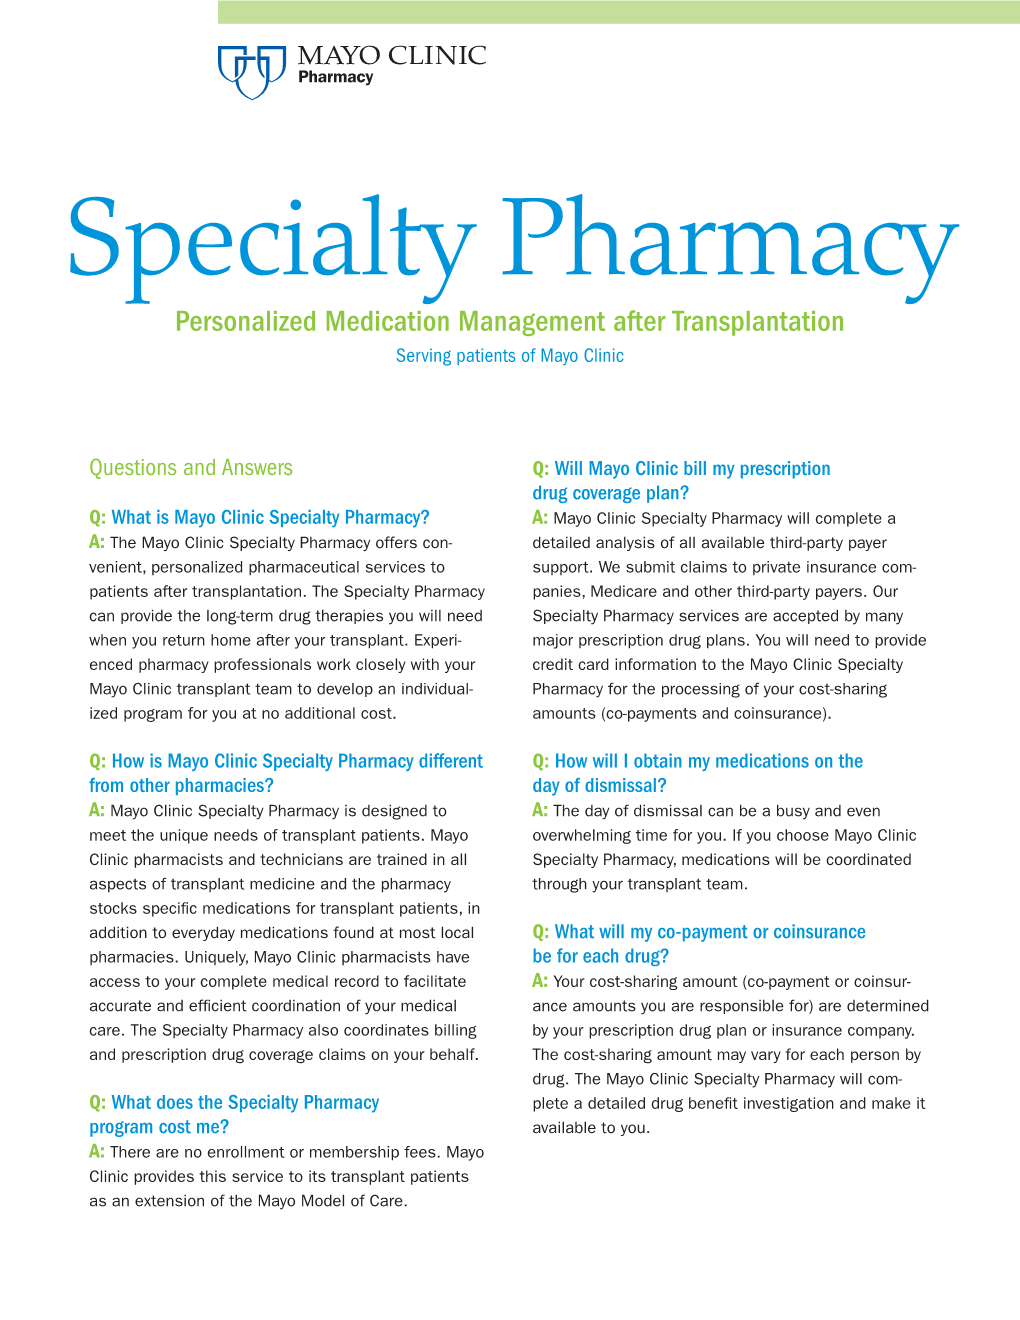 Specialty Pharmacy Q and a Fact Sheet